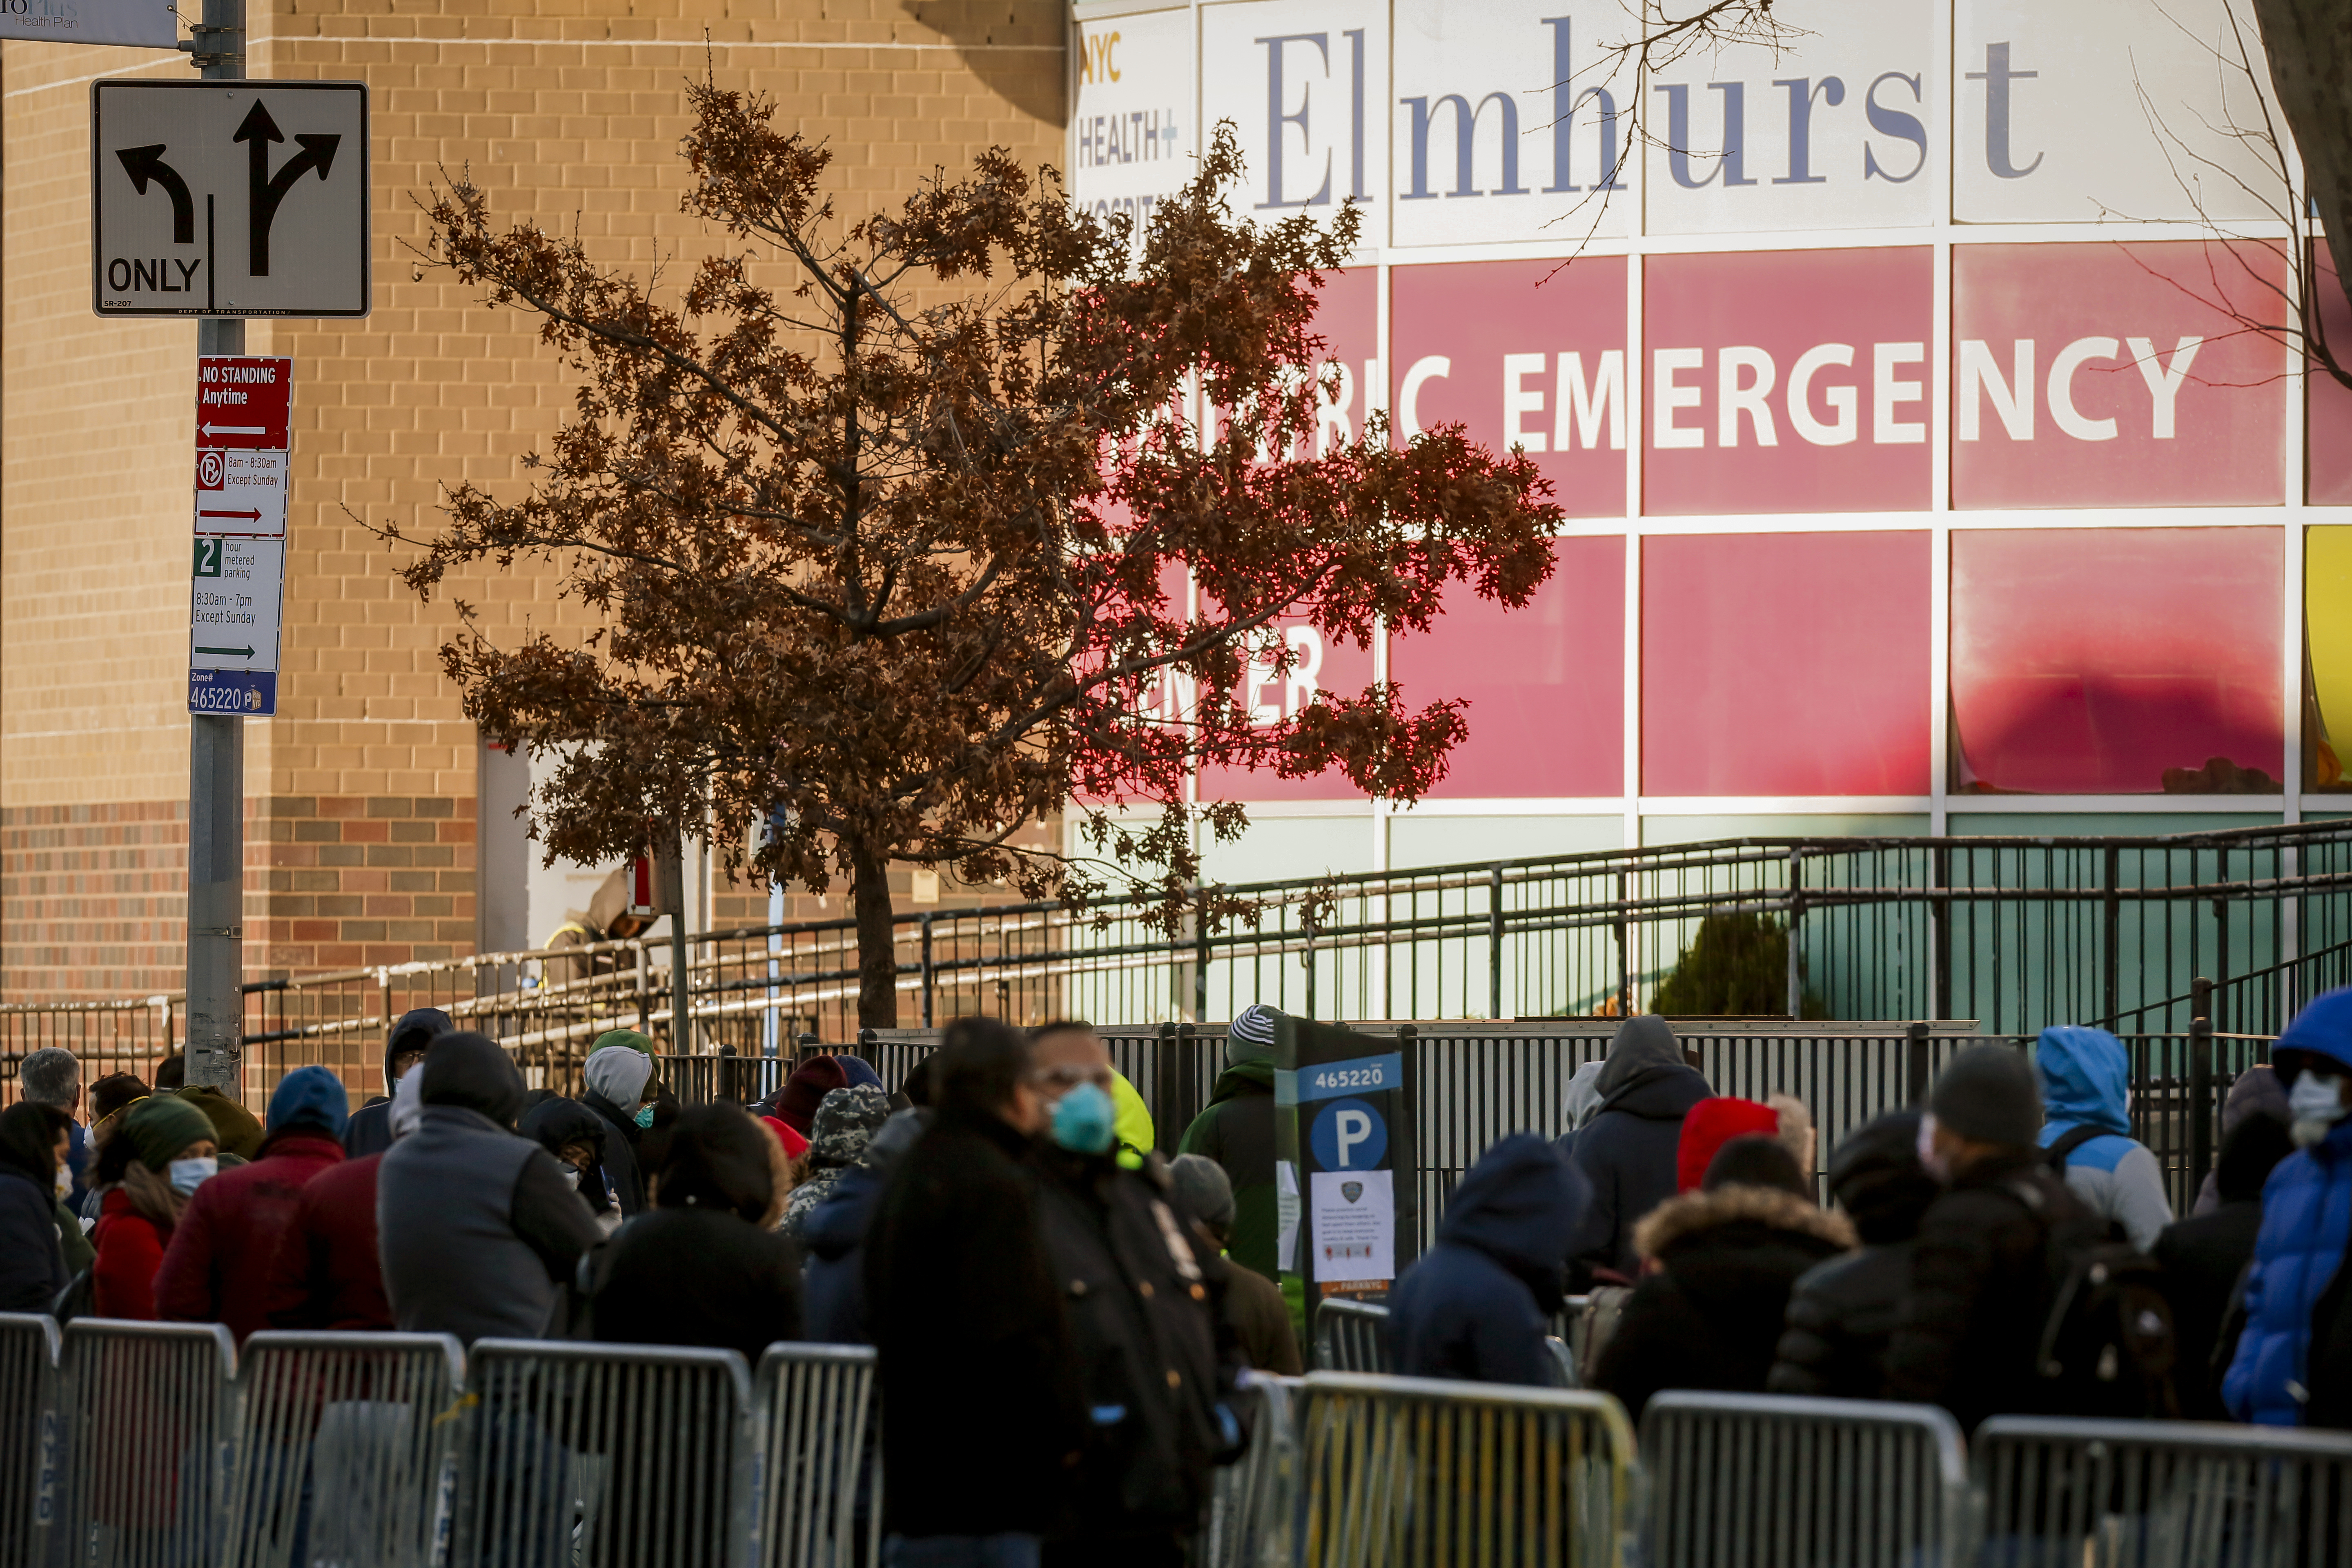 People line up early in the morning to be tested for coronavirus disease (COVID-19) outside Elmhurst Hospital Center in the Queens borough of New York